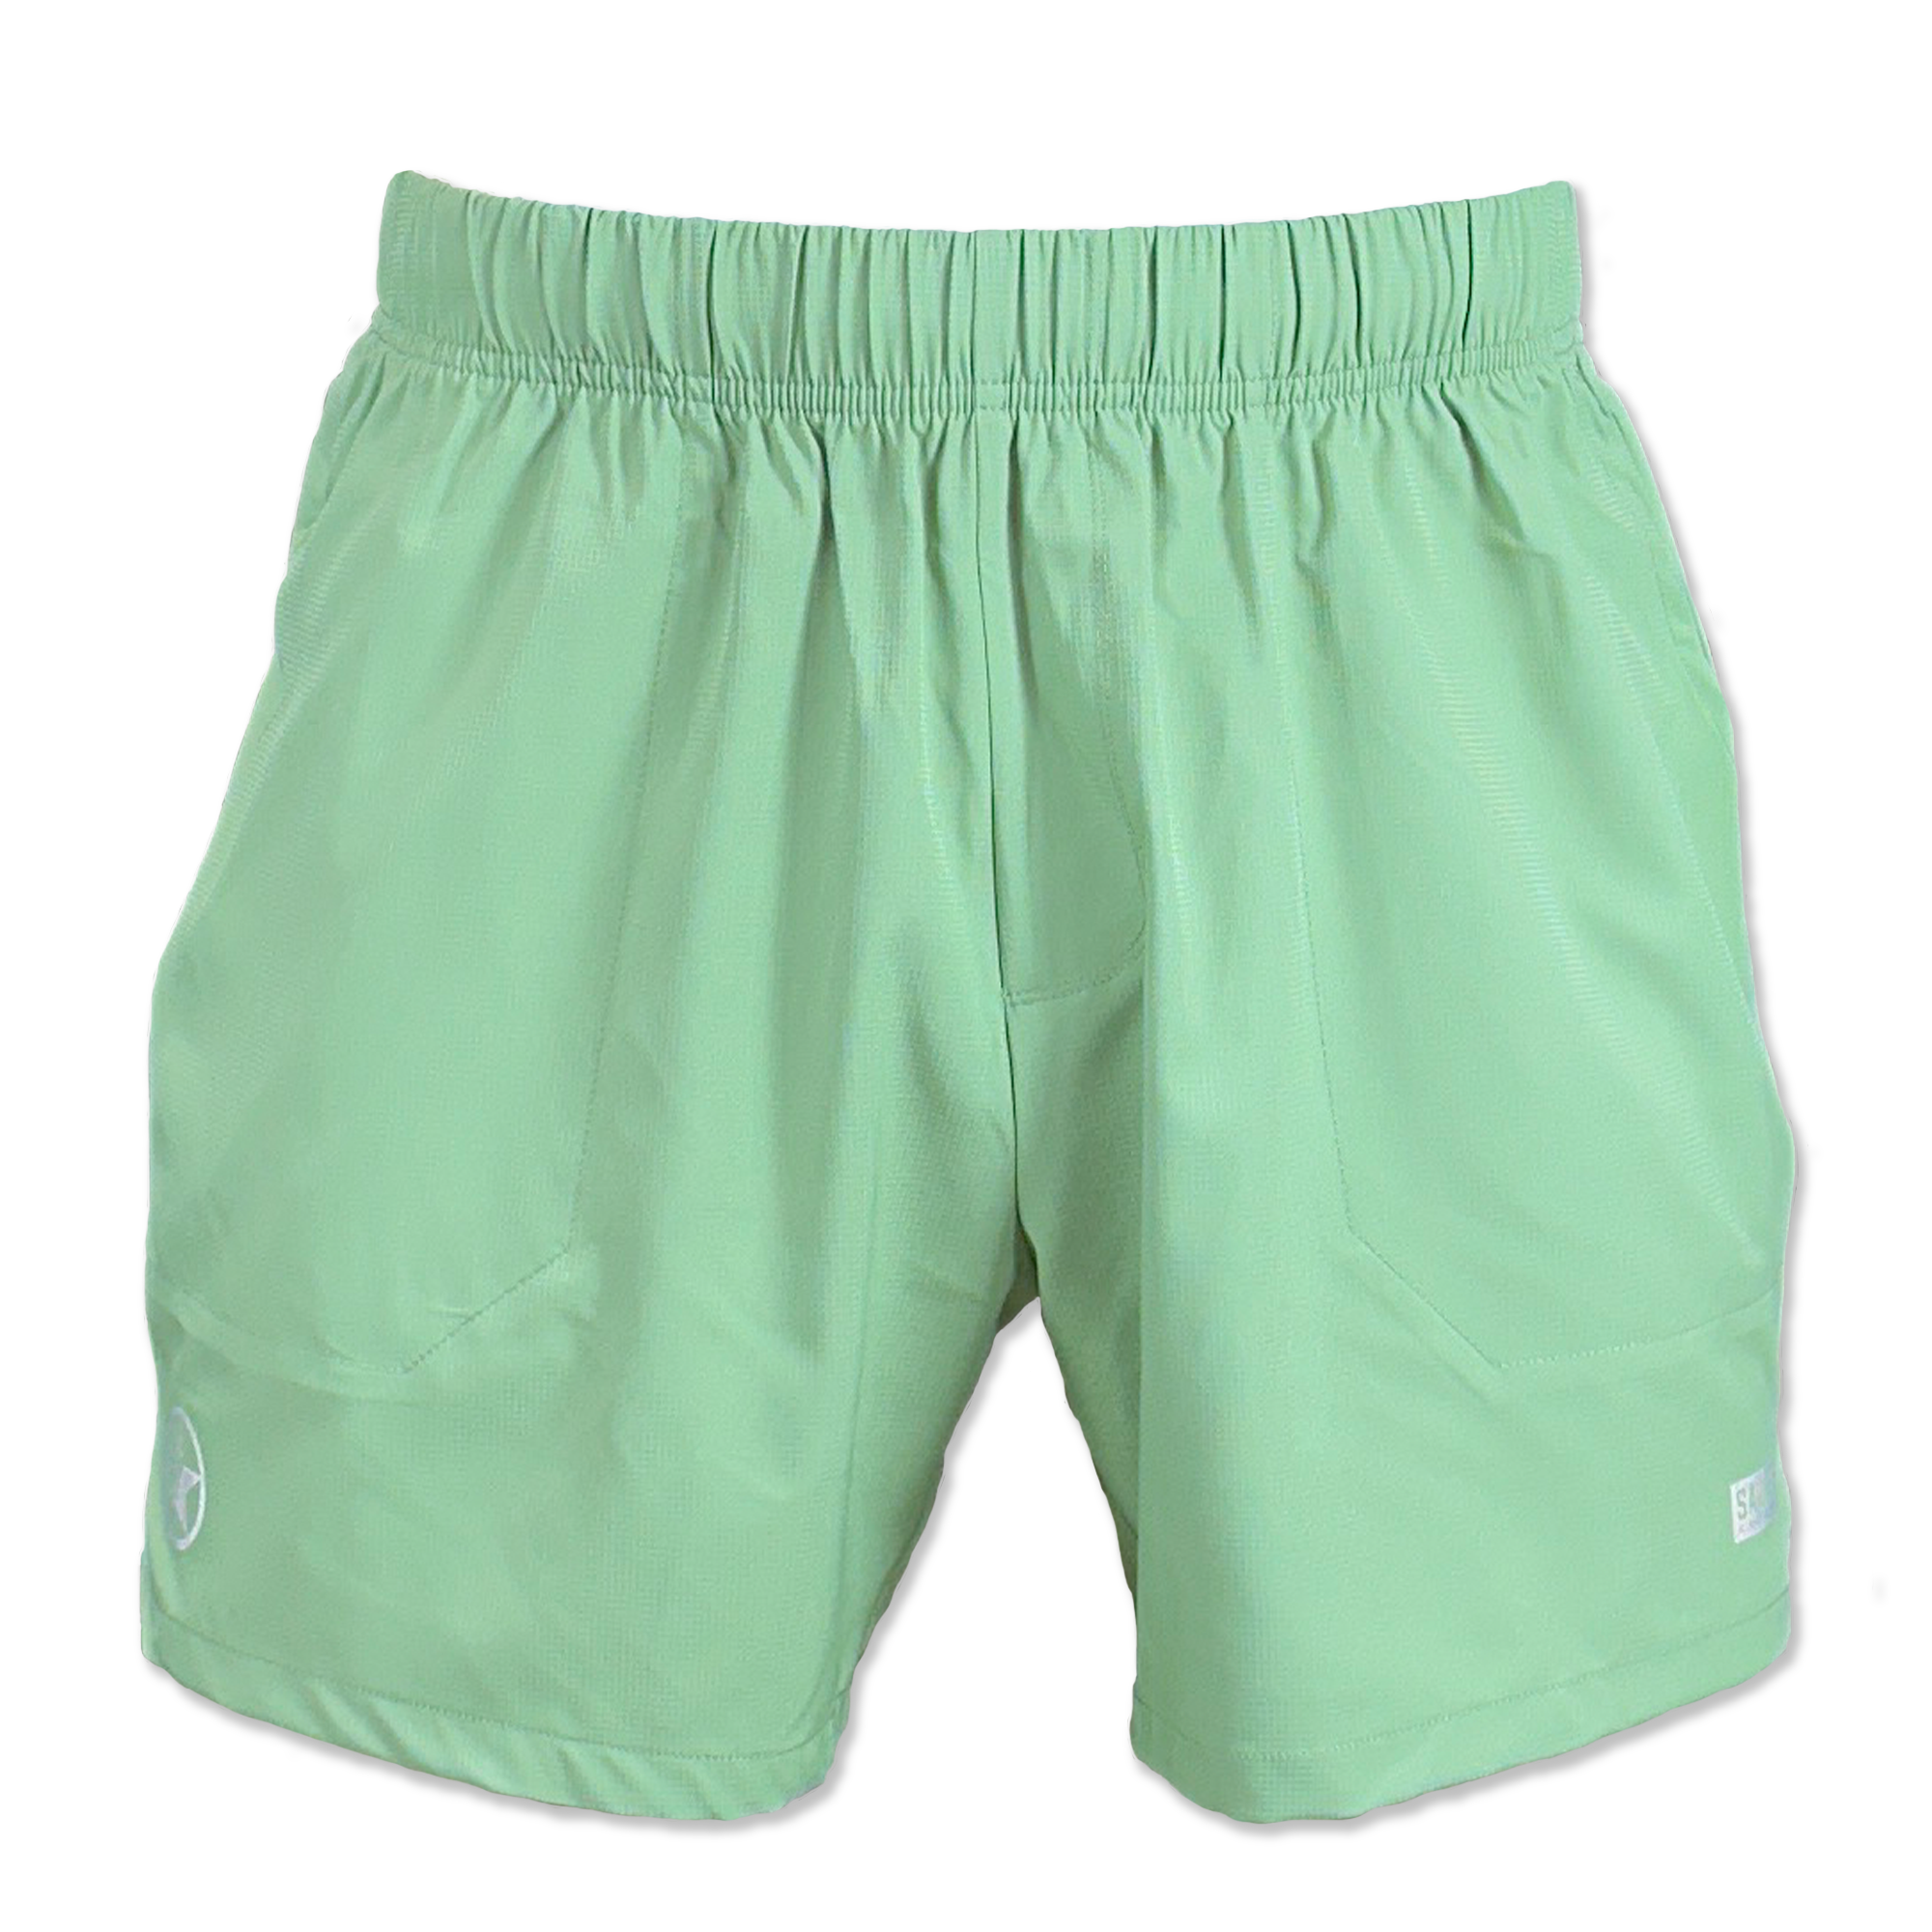 Men's Shorts - Competition 3.0 - Wasabi - Savage Barbell Apparel